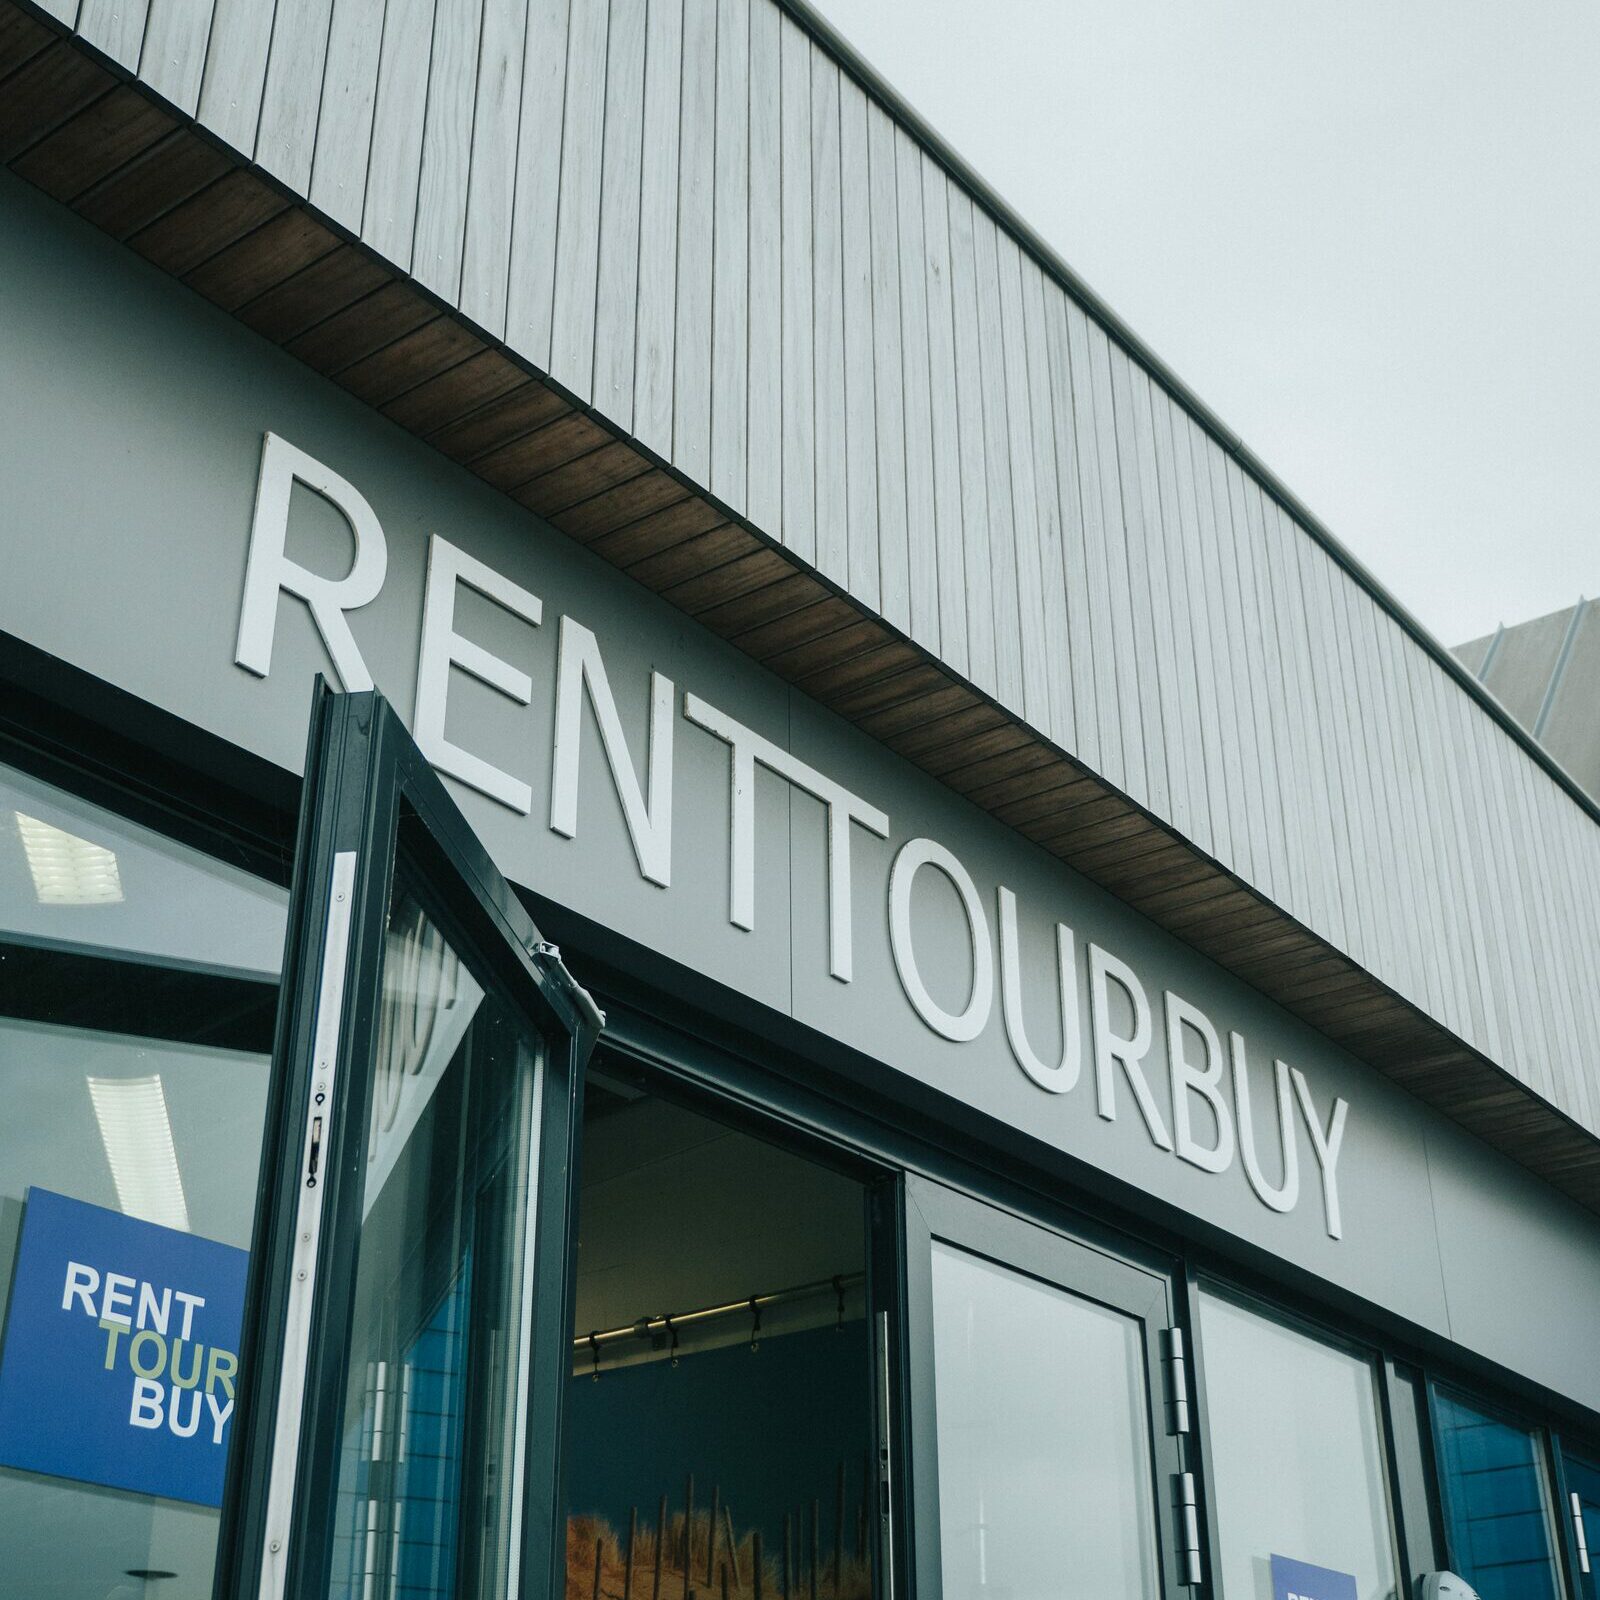 RentTourBuy in Ouddorp